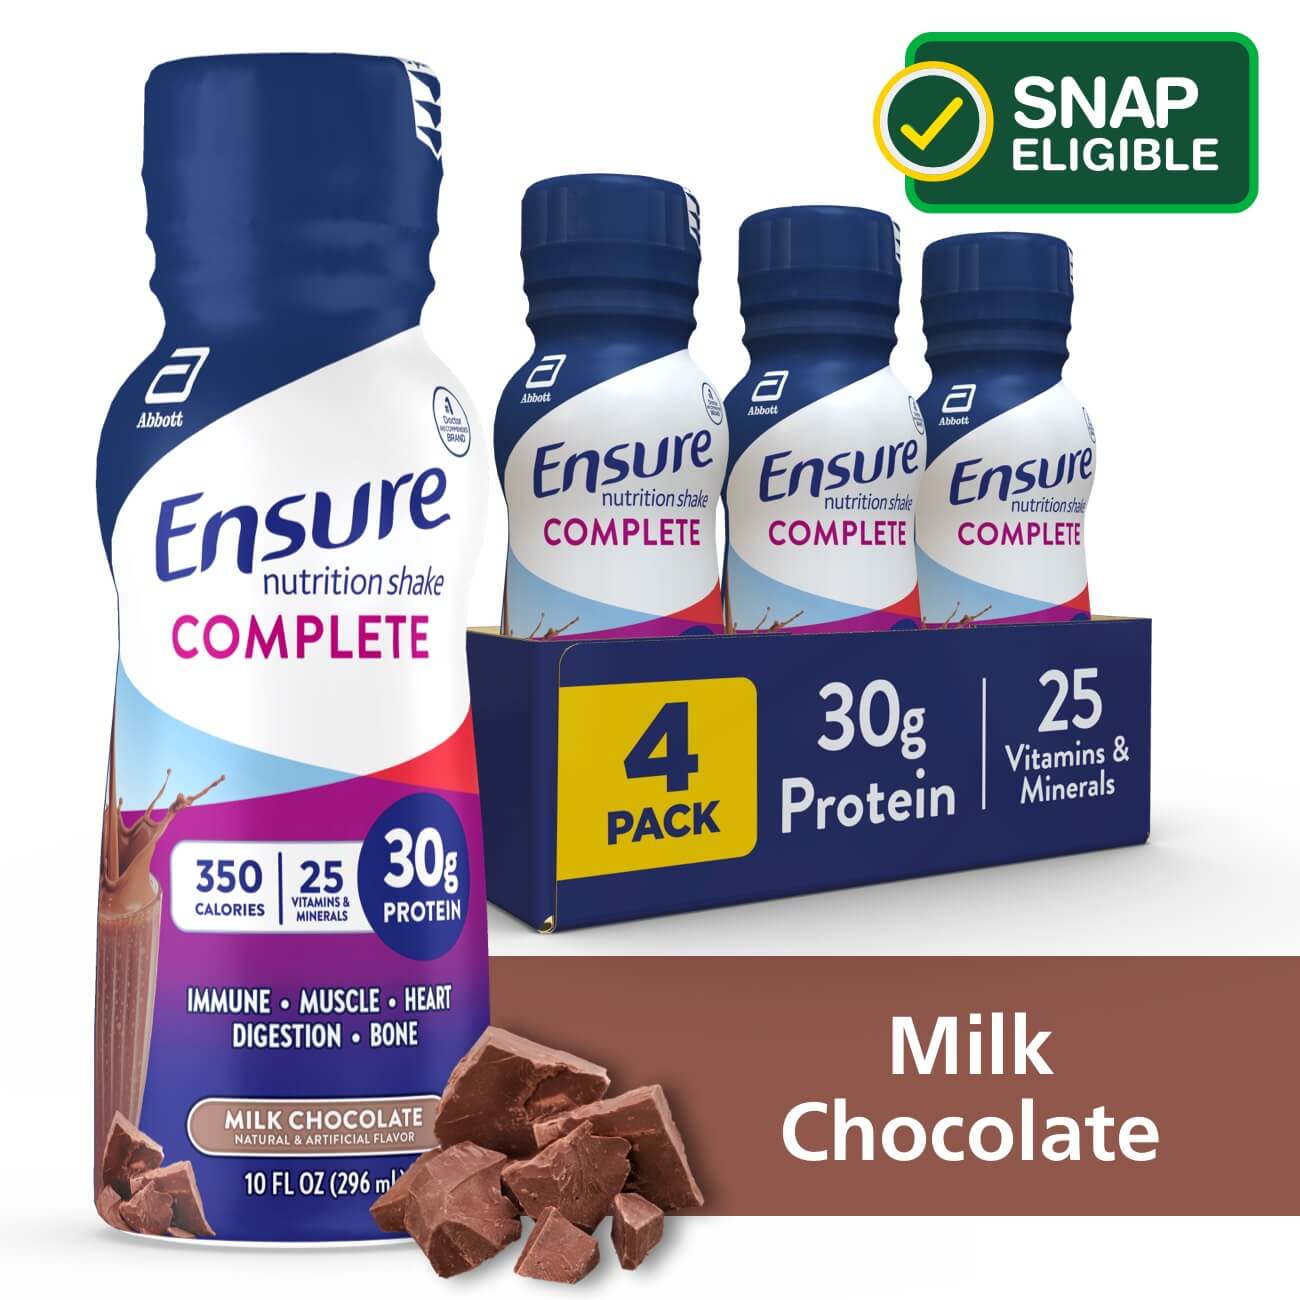 Ensure COMPLETE Nutrition Shake, Chocolate, 10 fl oz, Count